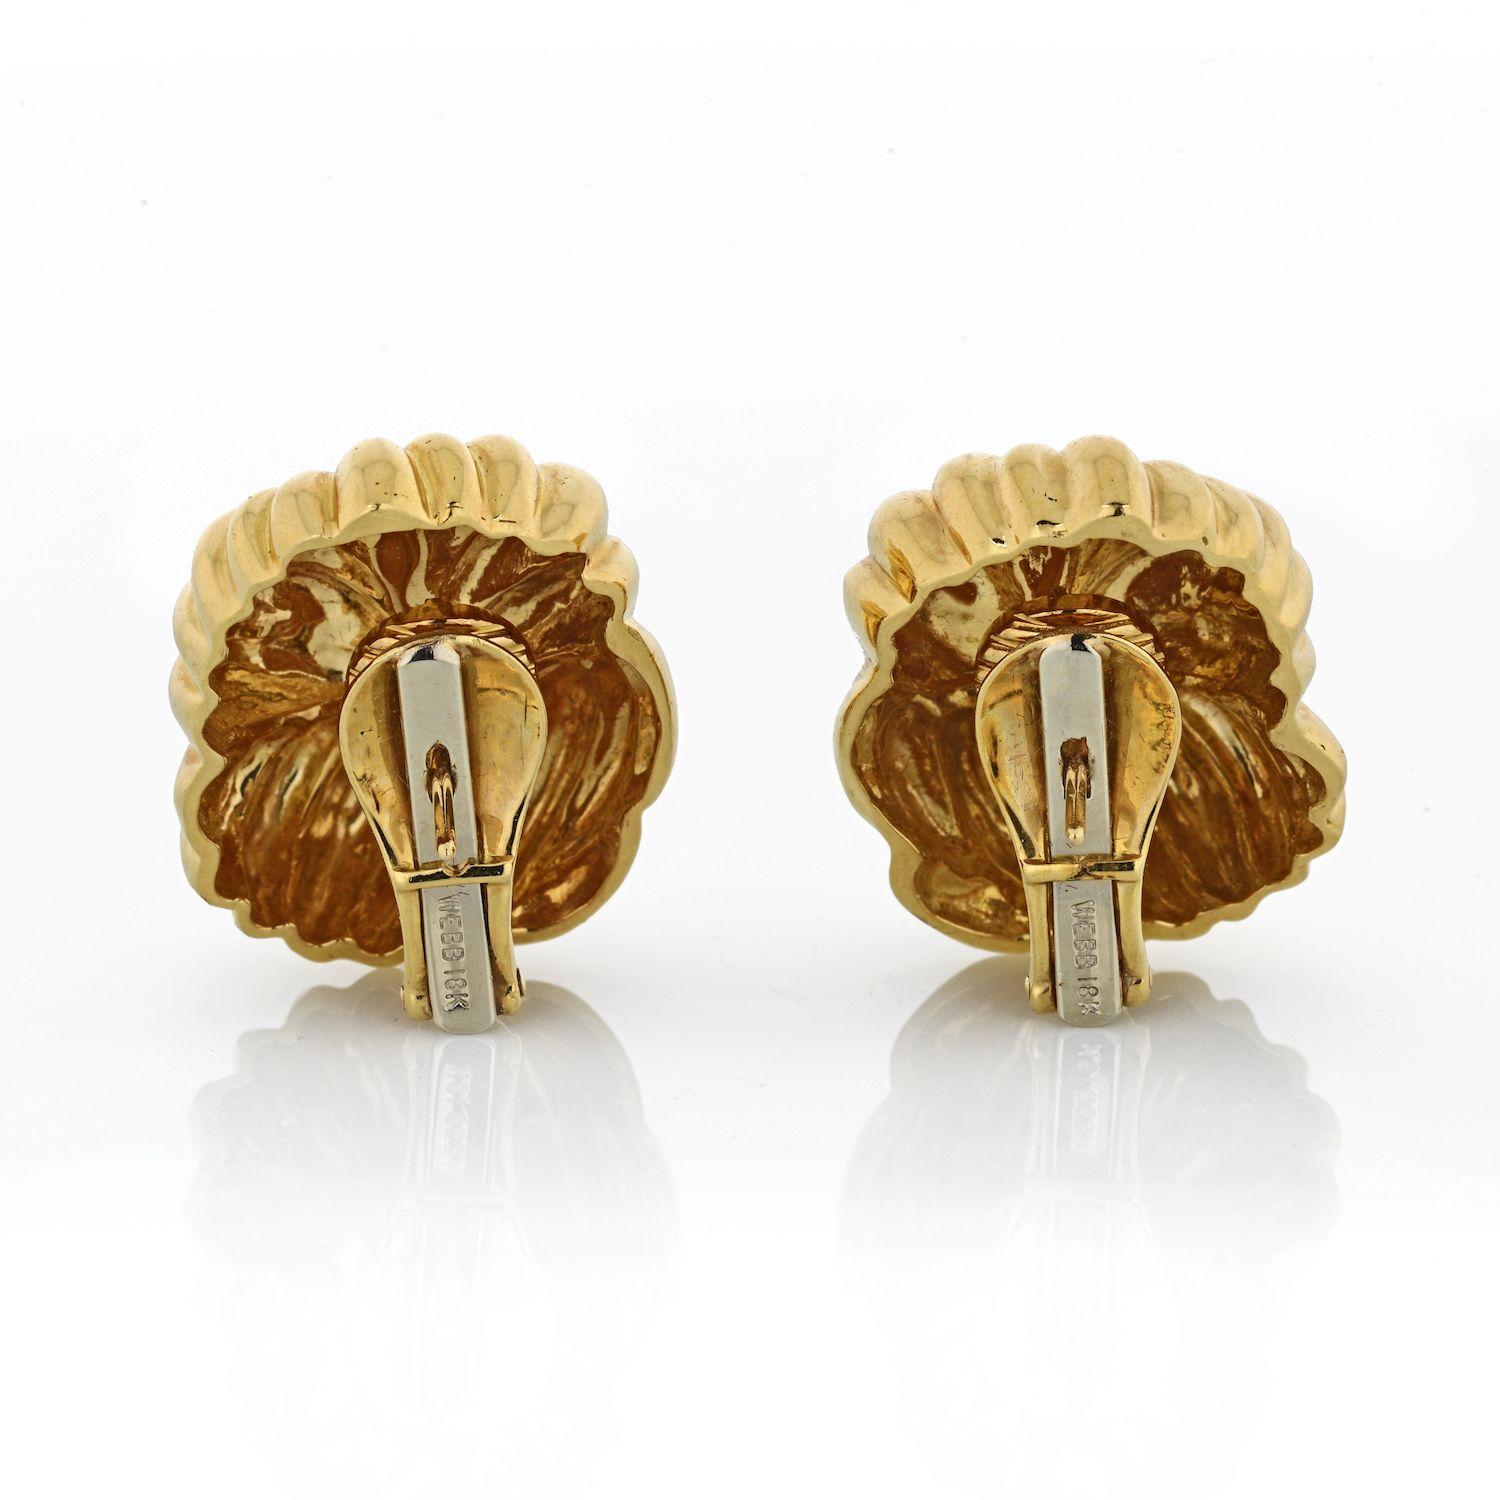 Exclusively from our estate David Webb collection, come a high polished and classic pair of earrings. David Webb is the quintessential American jeweler of exceedingly modern jewelry. Driven by art, design and bold pieces these earrings embody David